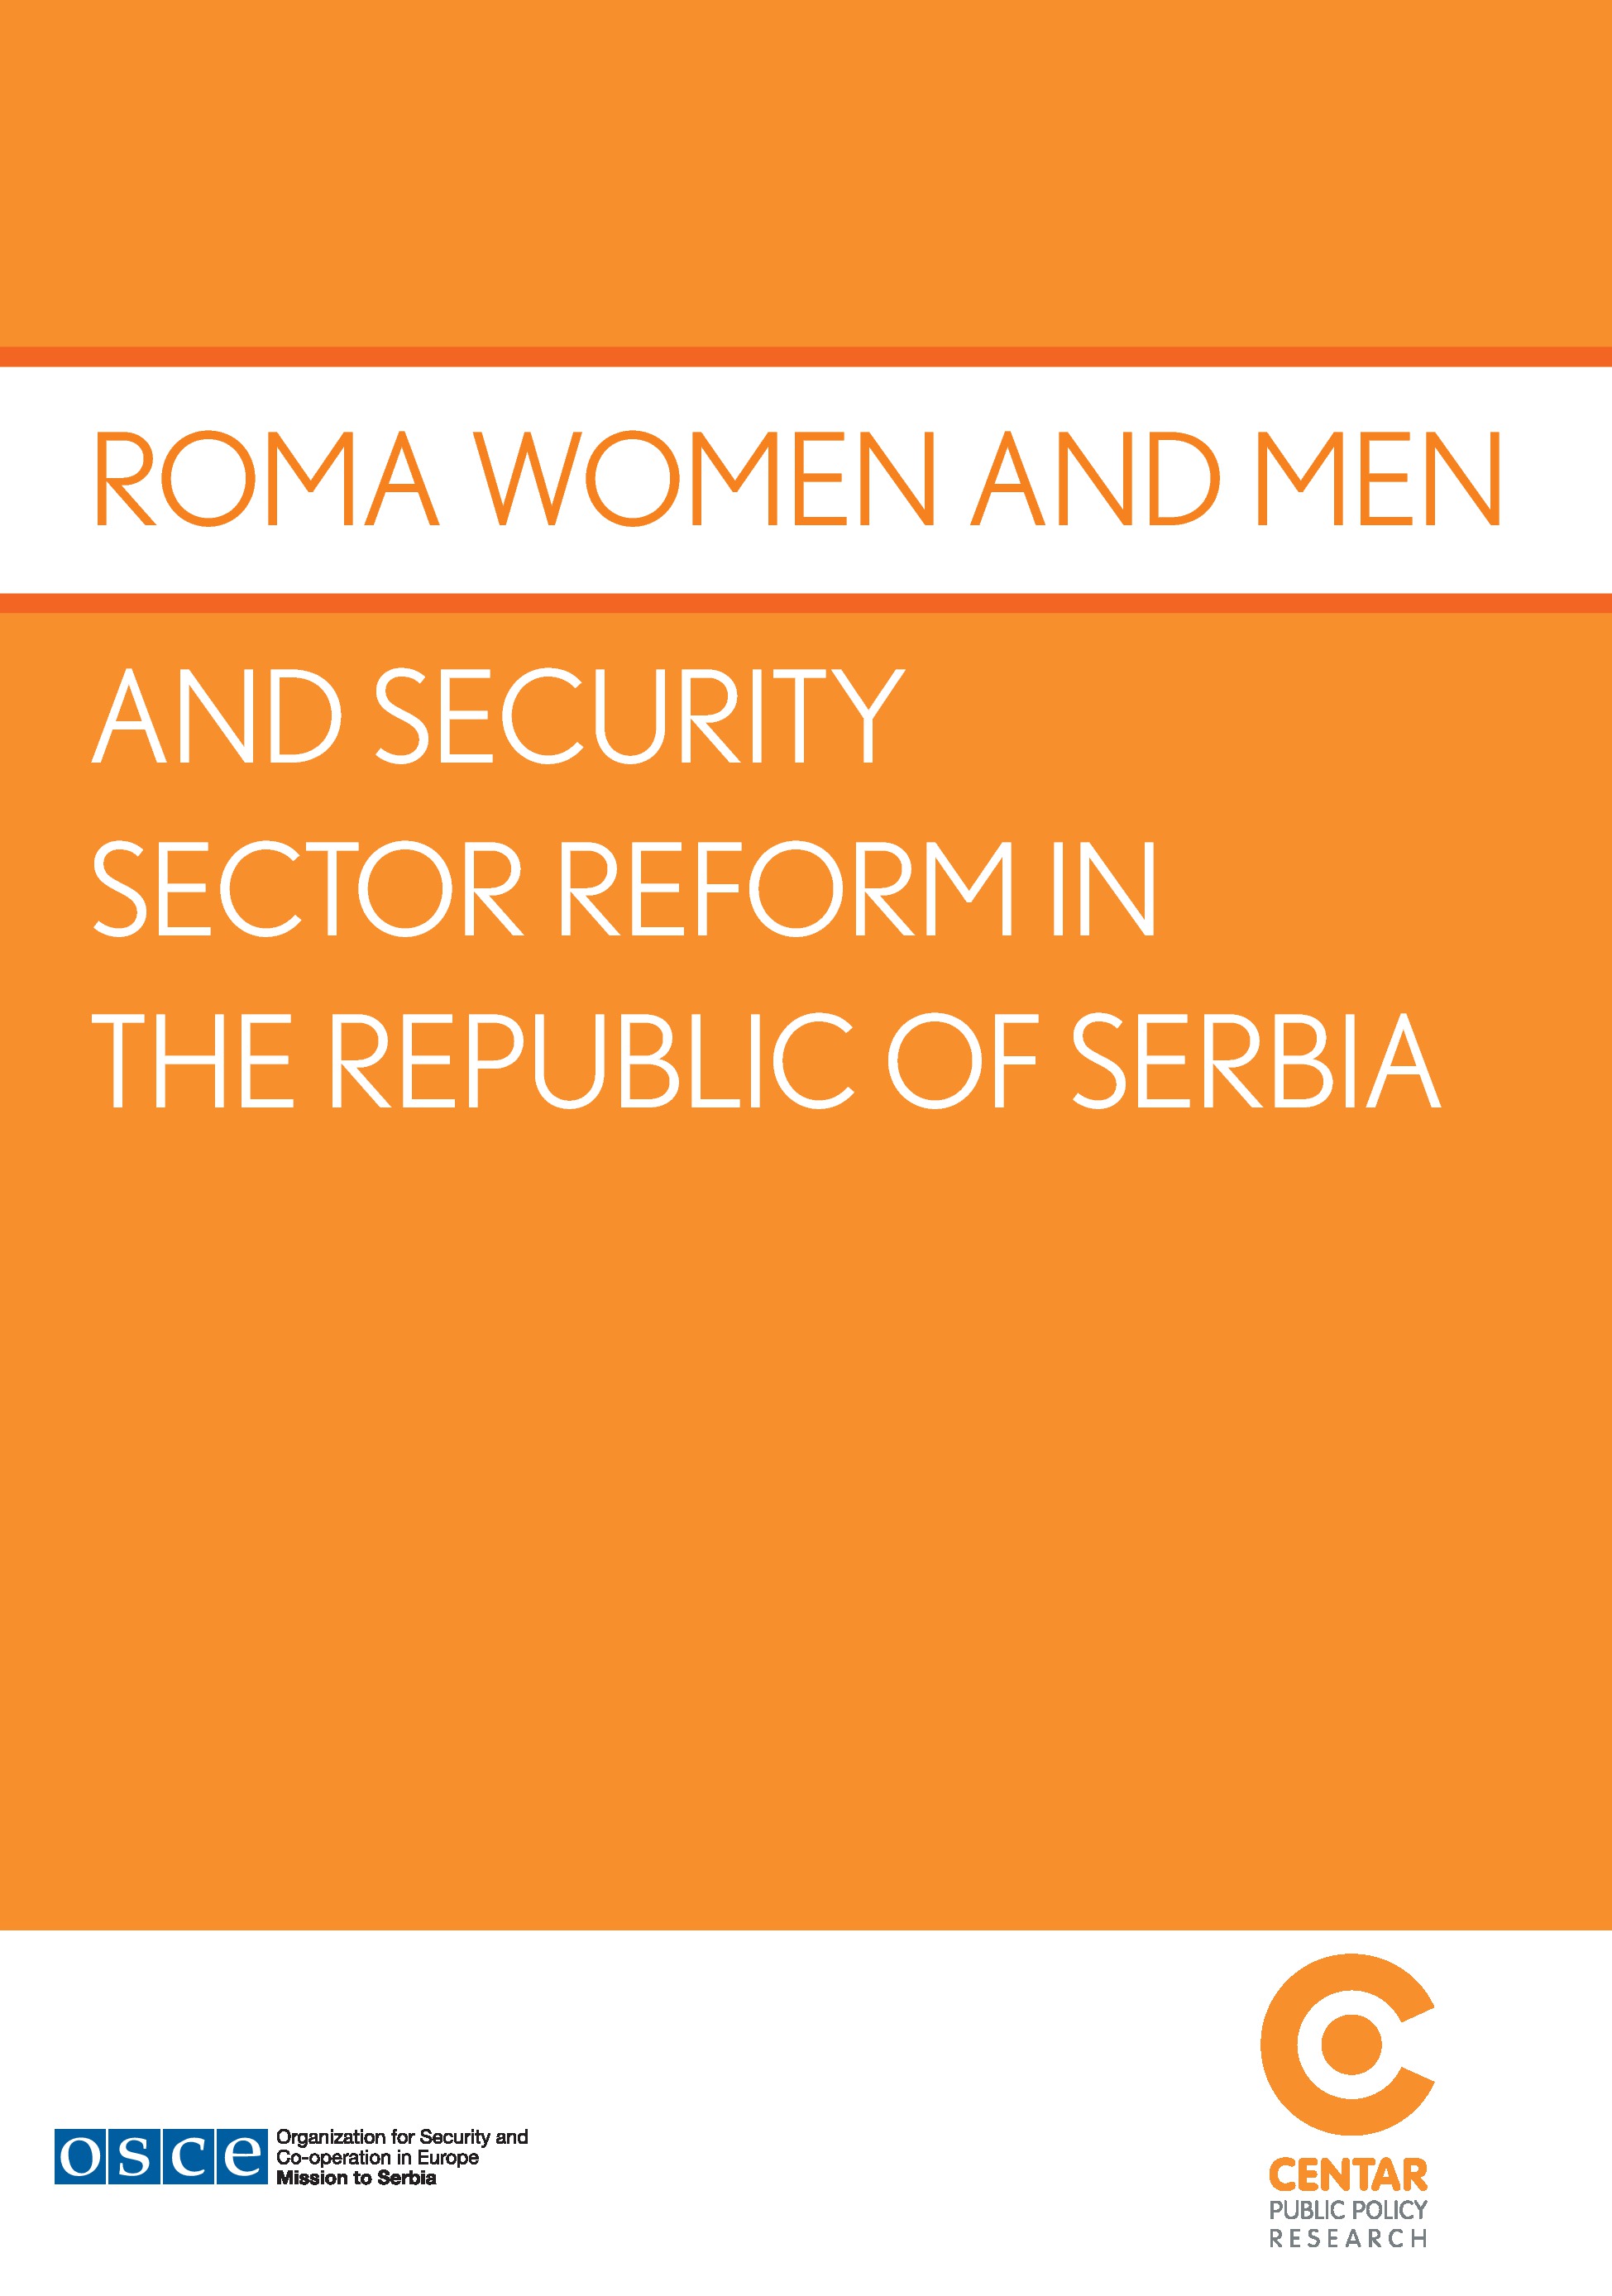 Roma Women and Men and Security Sector Reform in the Republic of Serbia